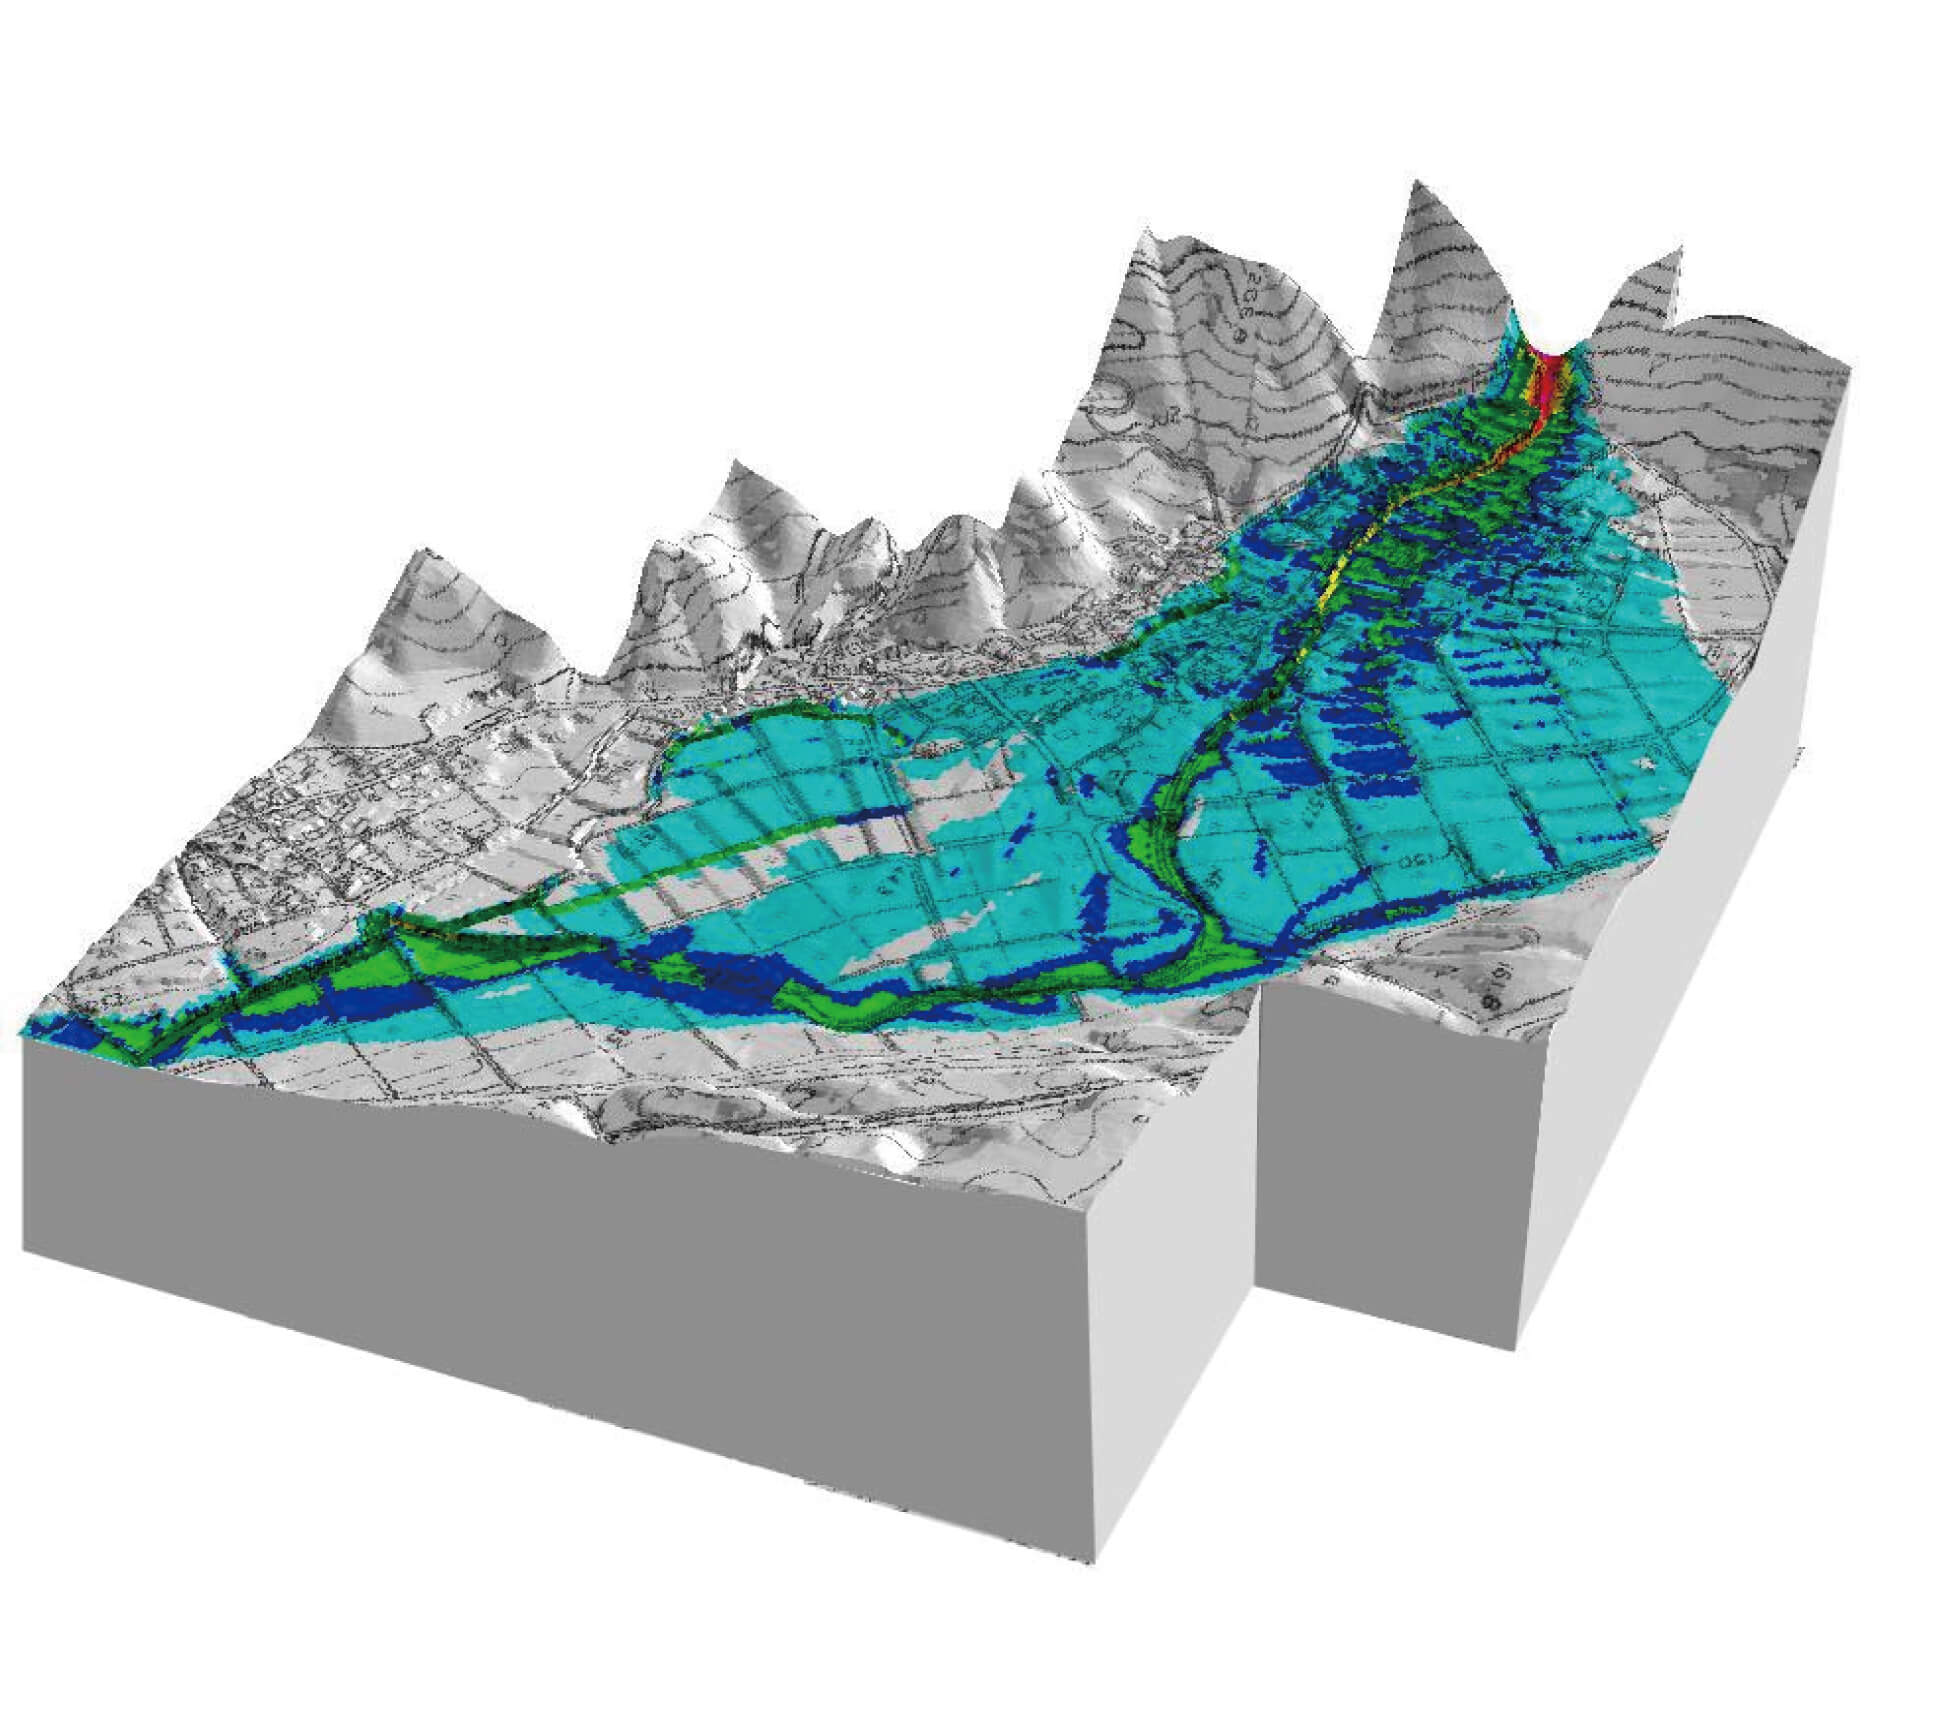 An example of three-dimensional visualization of a debris flow calculation result